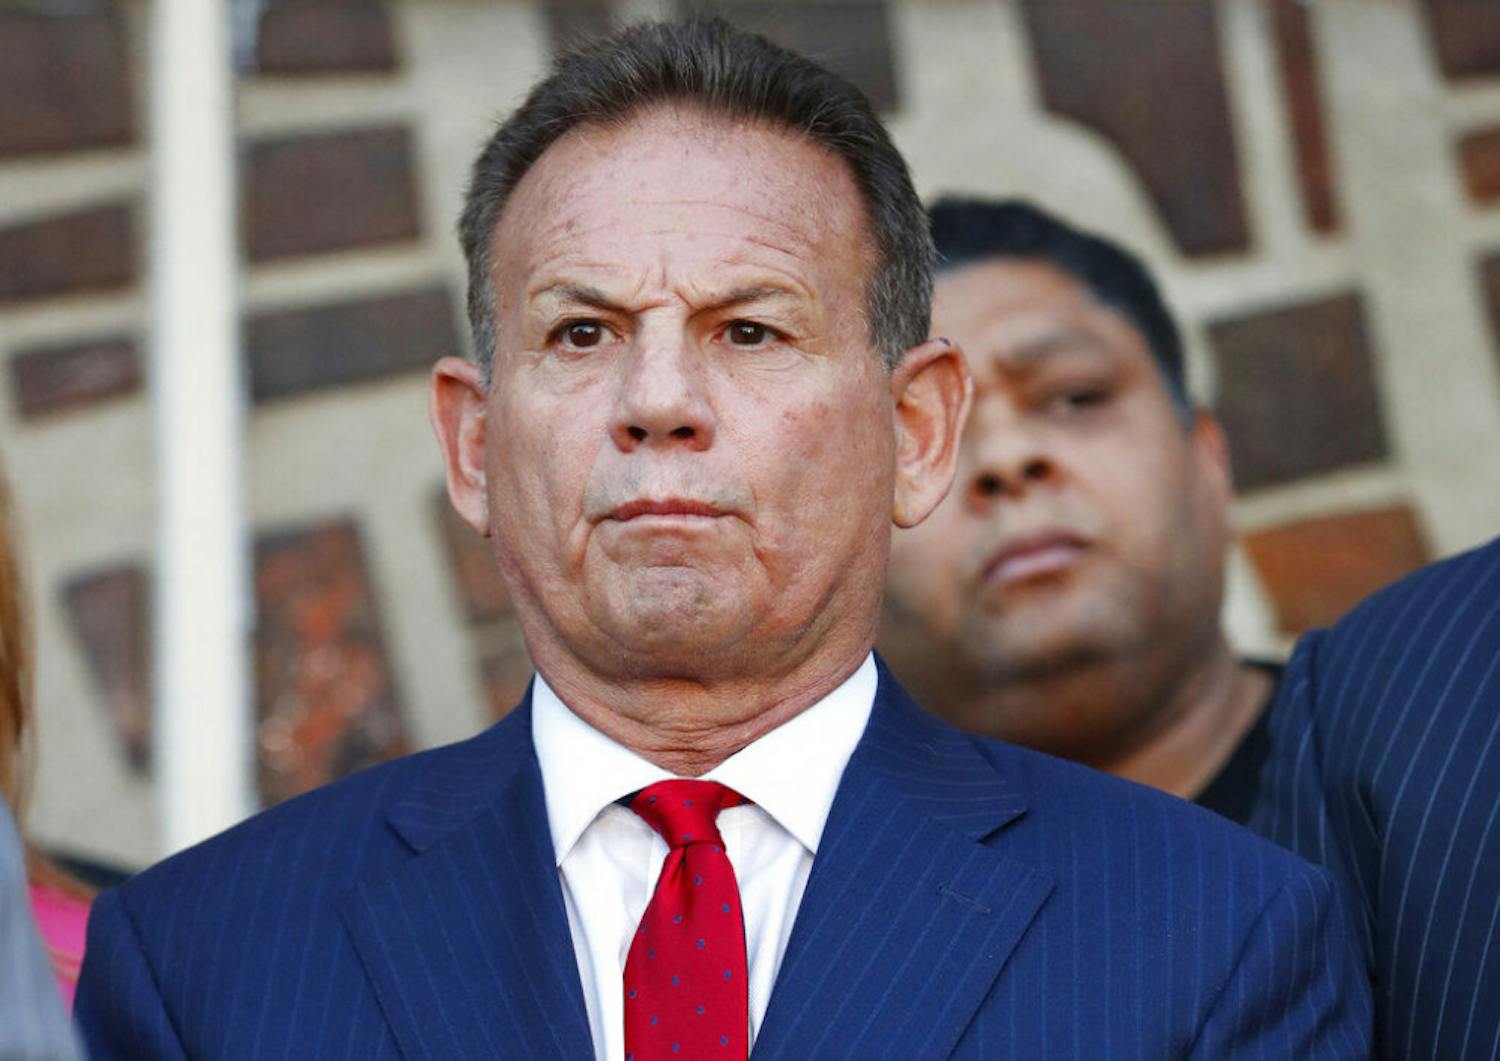 In this Jan. 11, 2019, photo, suspended Broward County Sheriff Scott Israel listens to comments by his attorney at a news conference after new Florida Gov. Ron DeSantis suspended Israel in Fort Lauderdale, Fla., over his handling of February's massacre at Marjory Stoneman Douglas High School. Israel testified for seven hours Wednesday, June 19, while fighting to regain his job. A lawyer for DeSantis focused his questions on training that former Deputy Scot Peterson received before the shooting in February 2018. Israel replied that Peterson was trained but there's no way he could have given him the courage to confront the shooter.